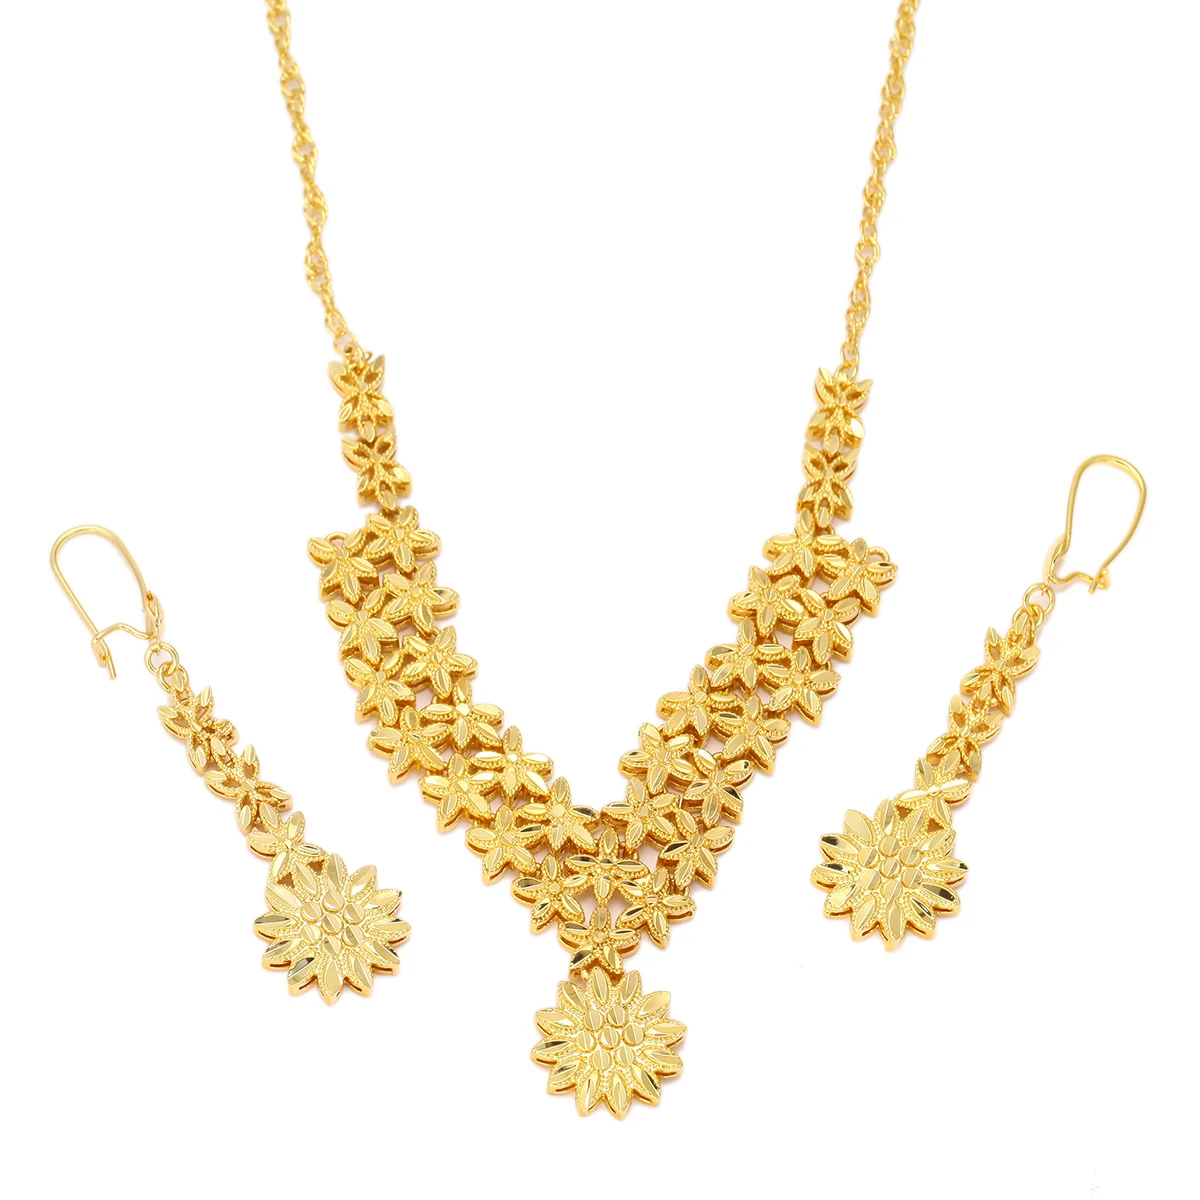 

22K Gold Color Ethiopian Women Trendy Jewelry Sets For Bride Wedding Necklace Earrings Arab Africa Jewelry Gifts